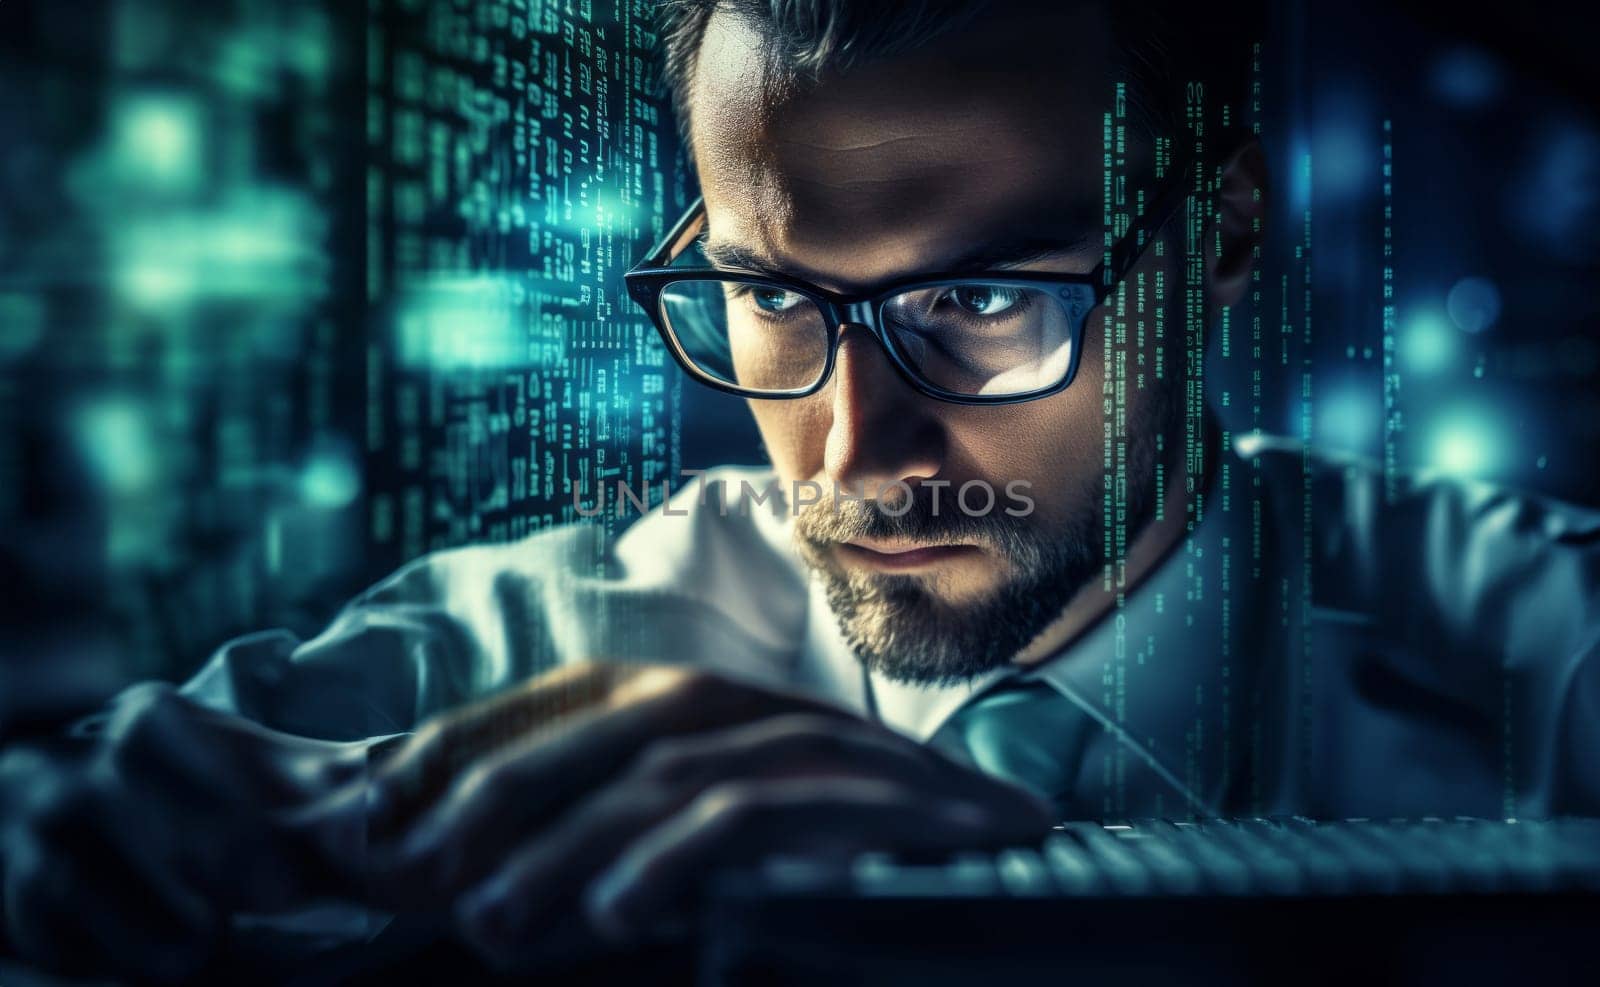 A hacker, surrounded by technological holograms, intensely focuses on coding in a close-up shot, portraying a futuristic cyber atmosphere.Generated image.